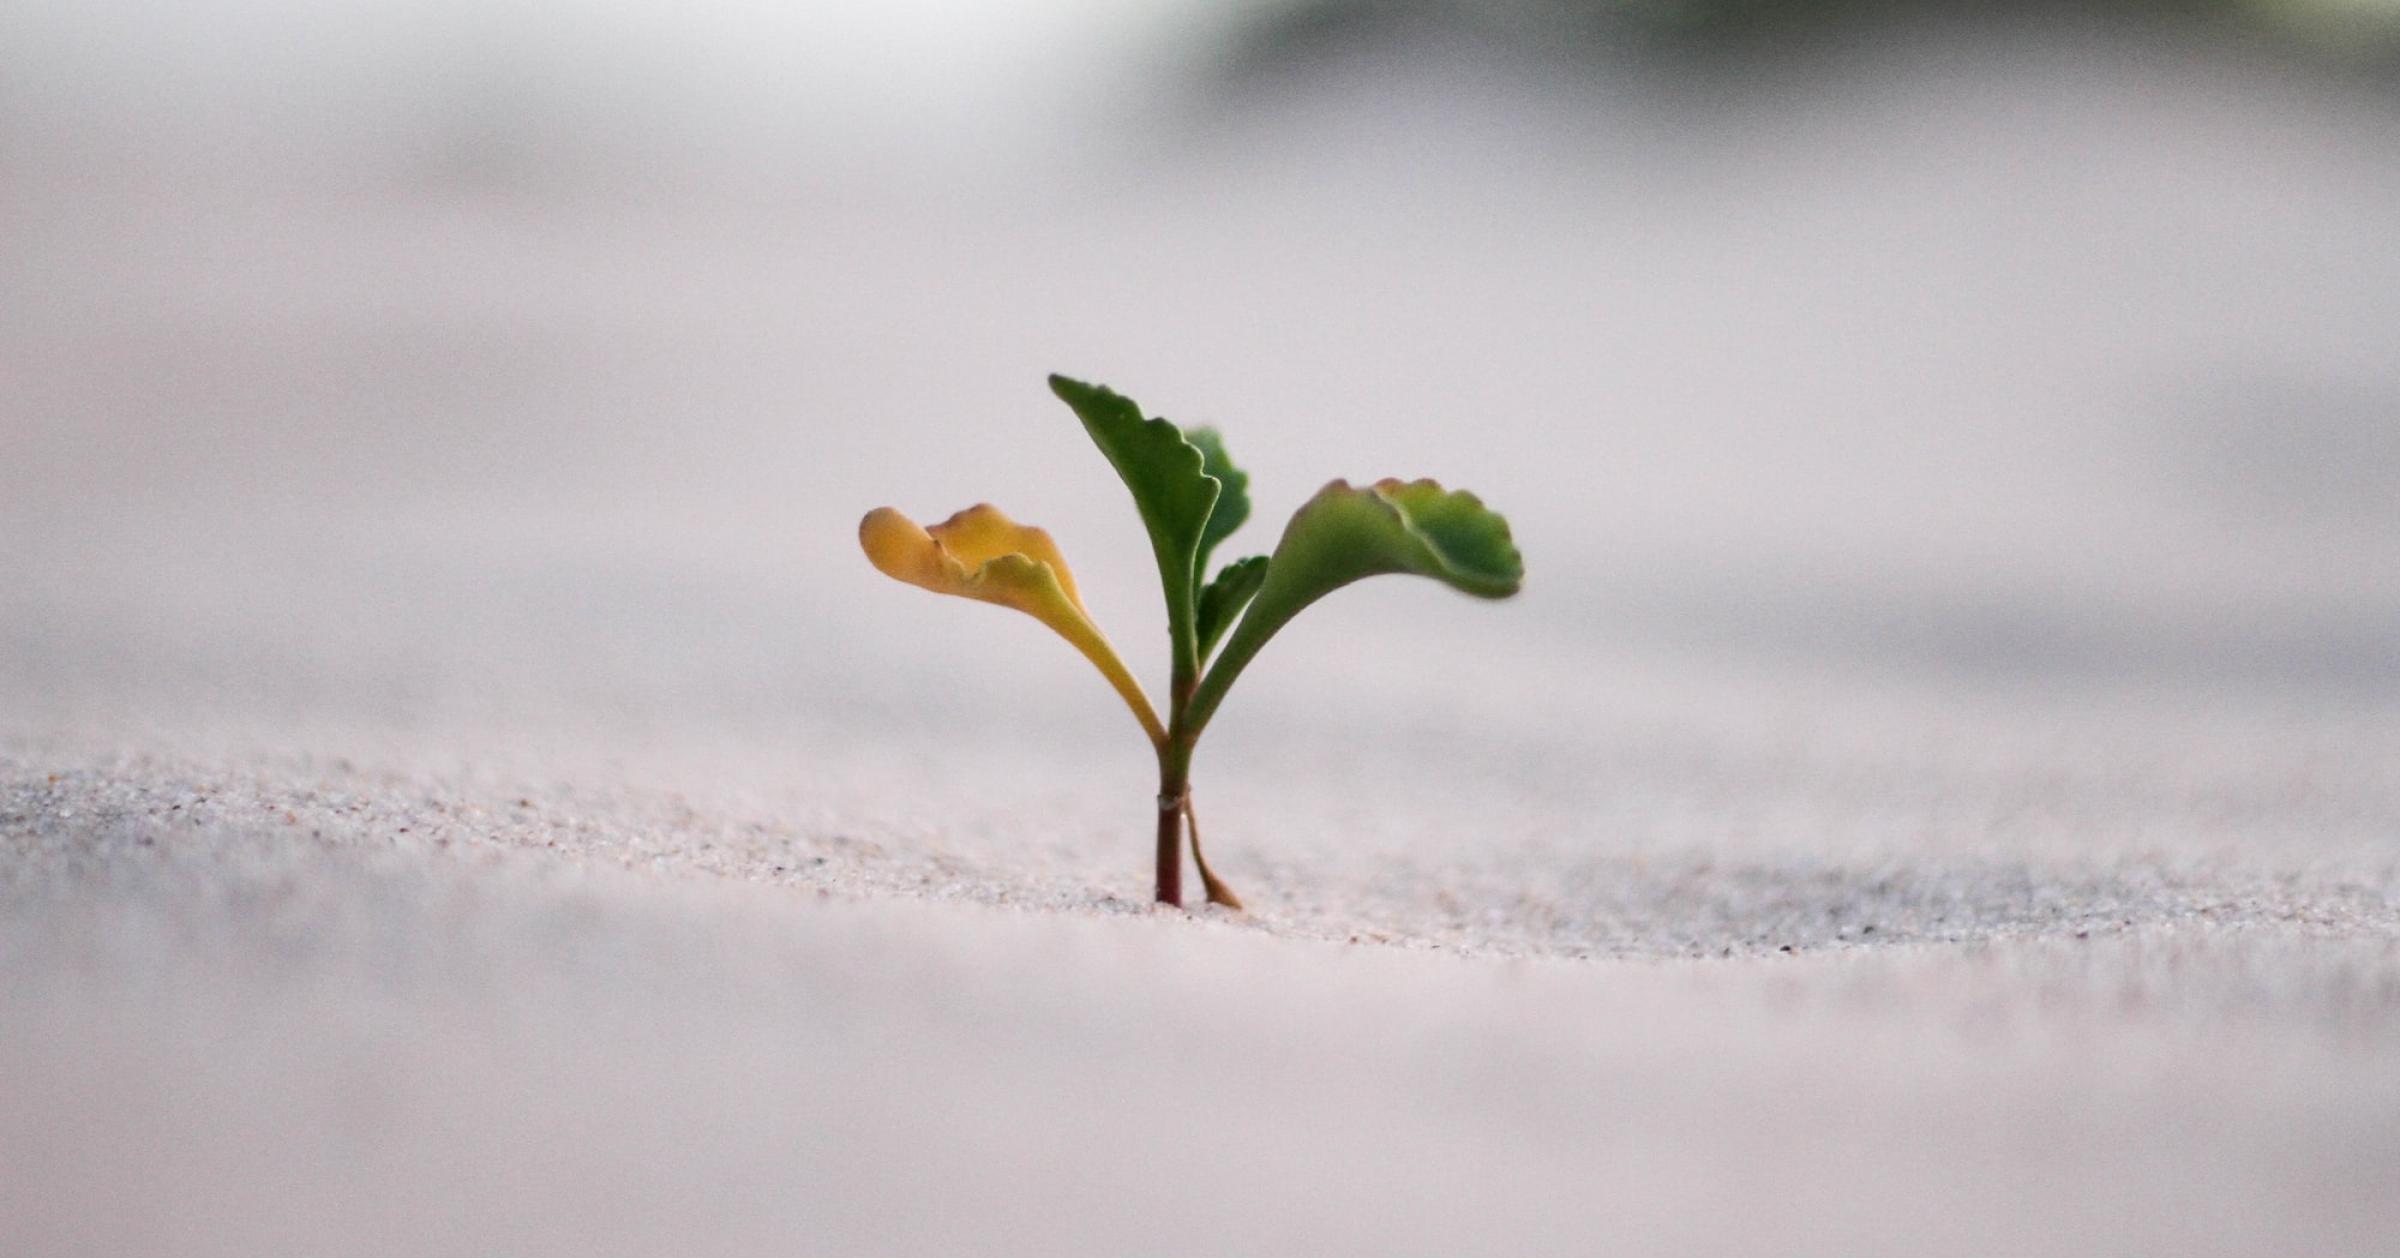 A small greenish plant breaking through a sandy surface.